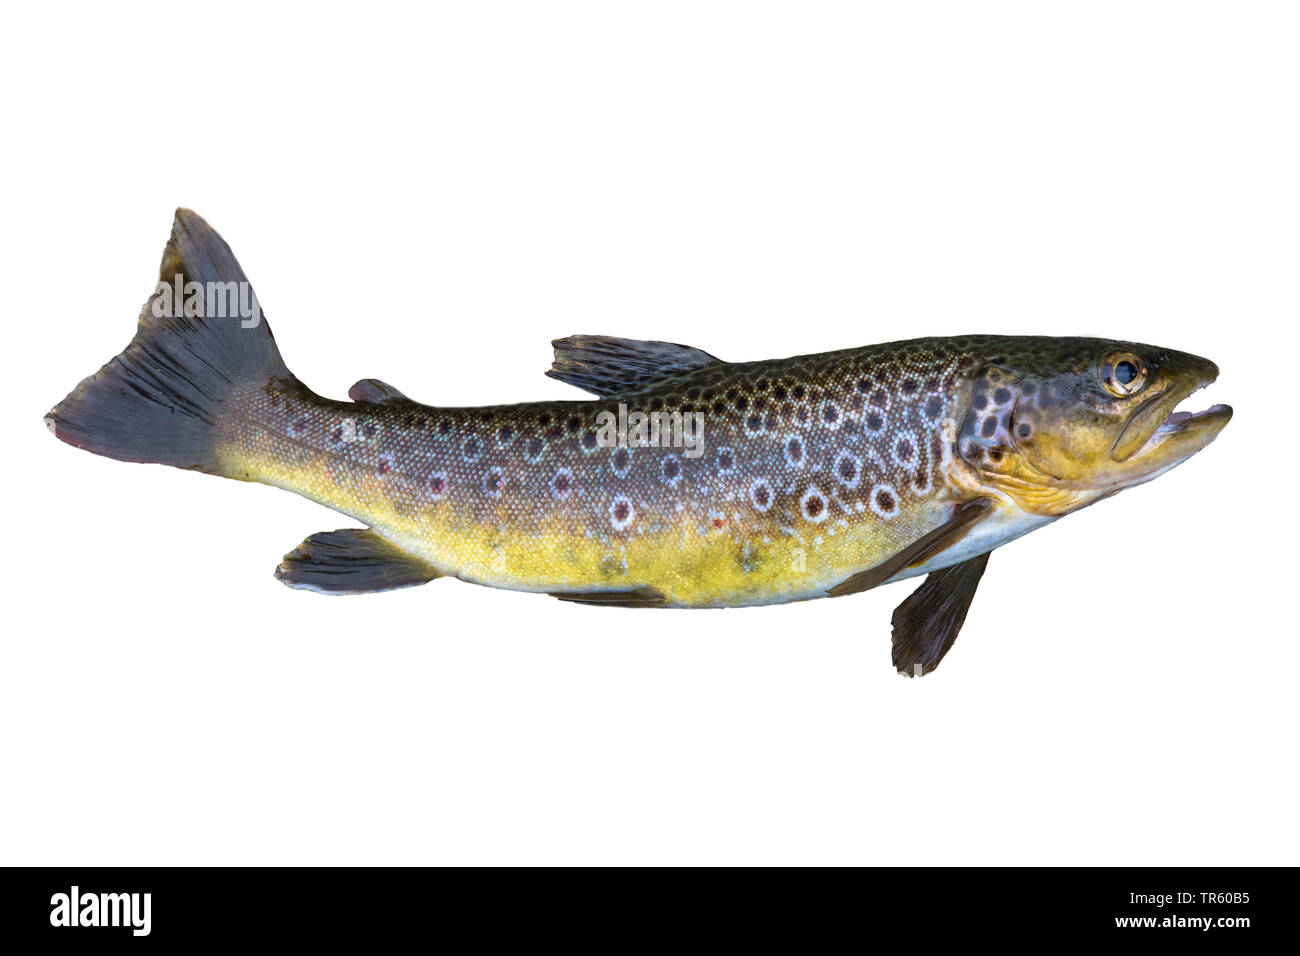 brown trout, river trout, brook trout (Salmo trutta fario), cut-out, side view Stock Photo